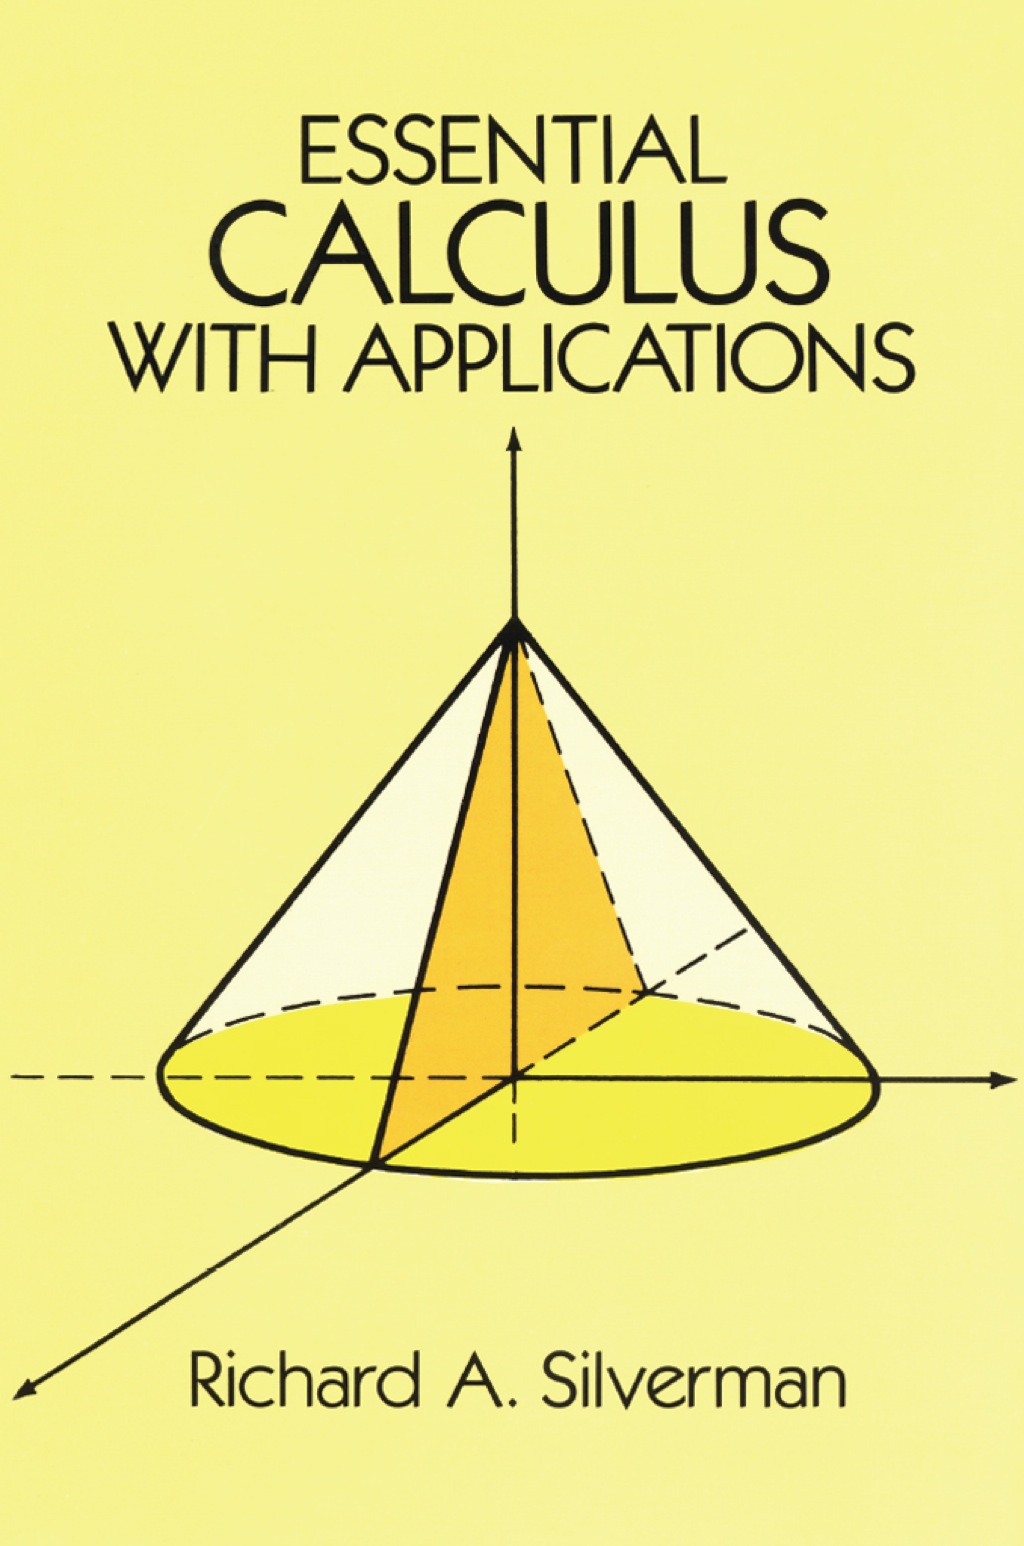 Essential Calculus with Applications (eBook) - Richard A. Silverman,